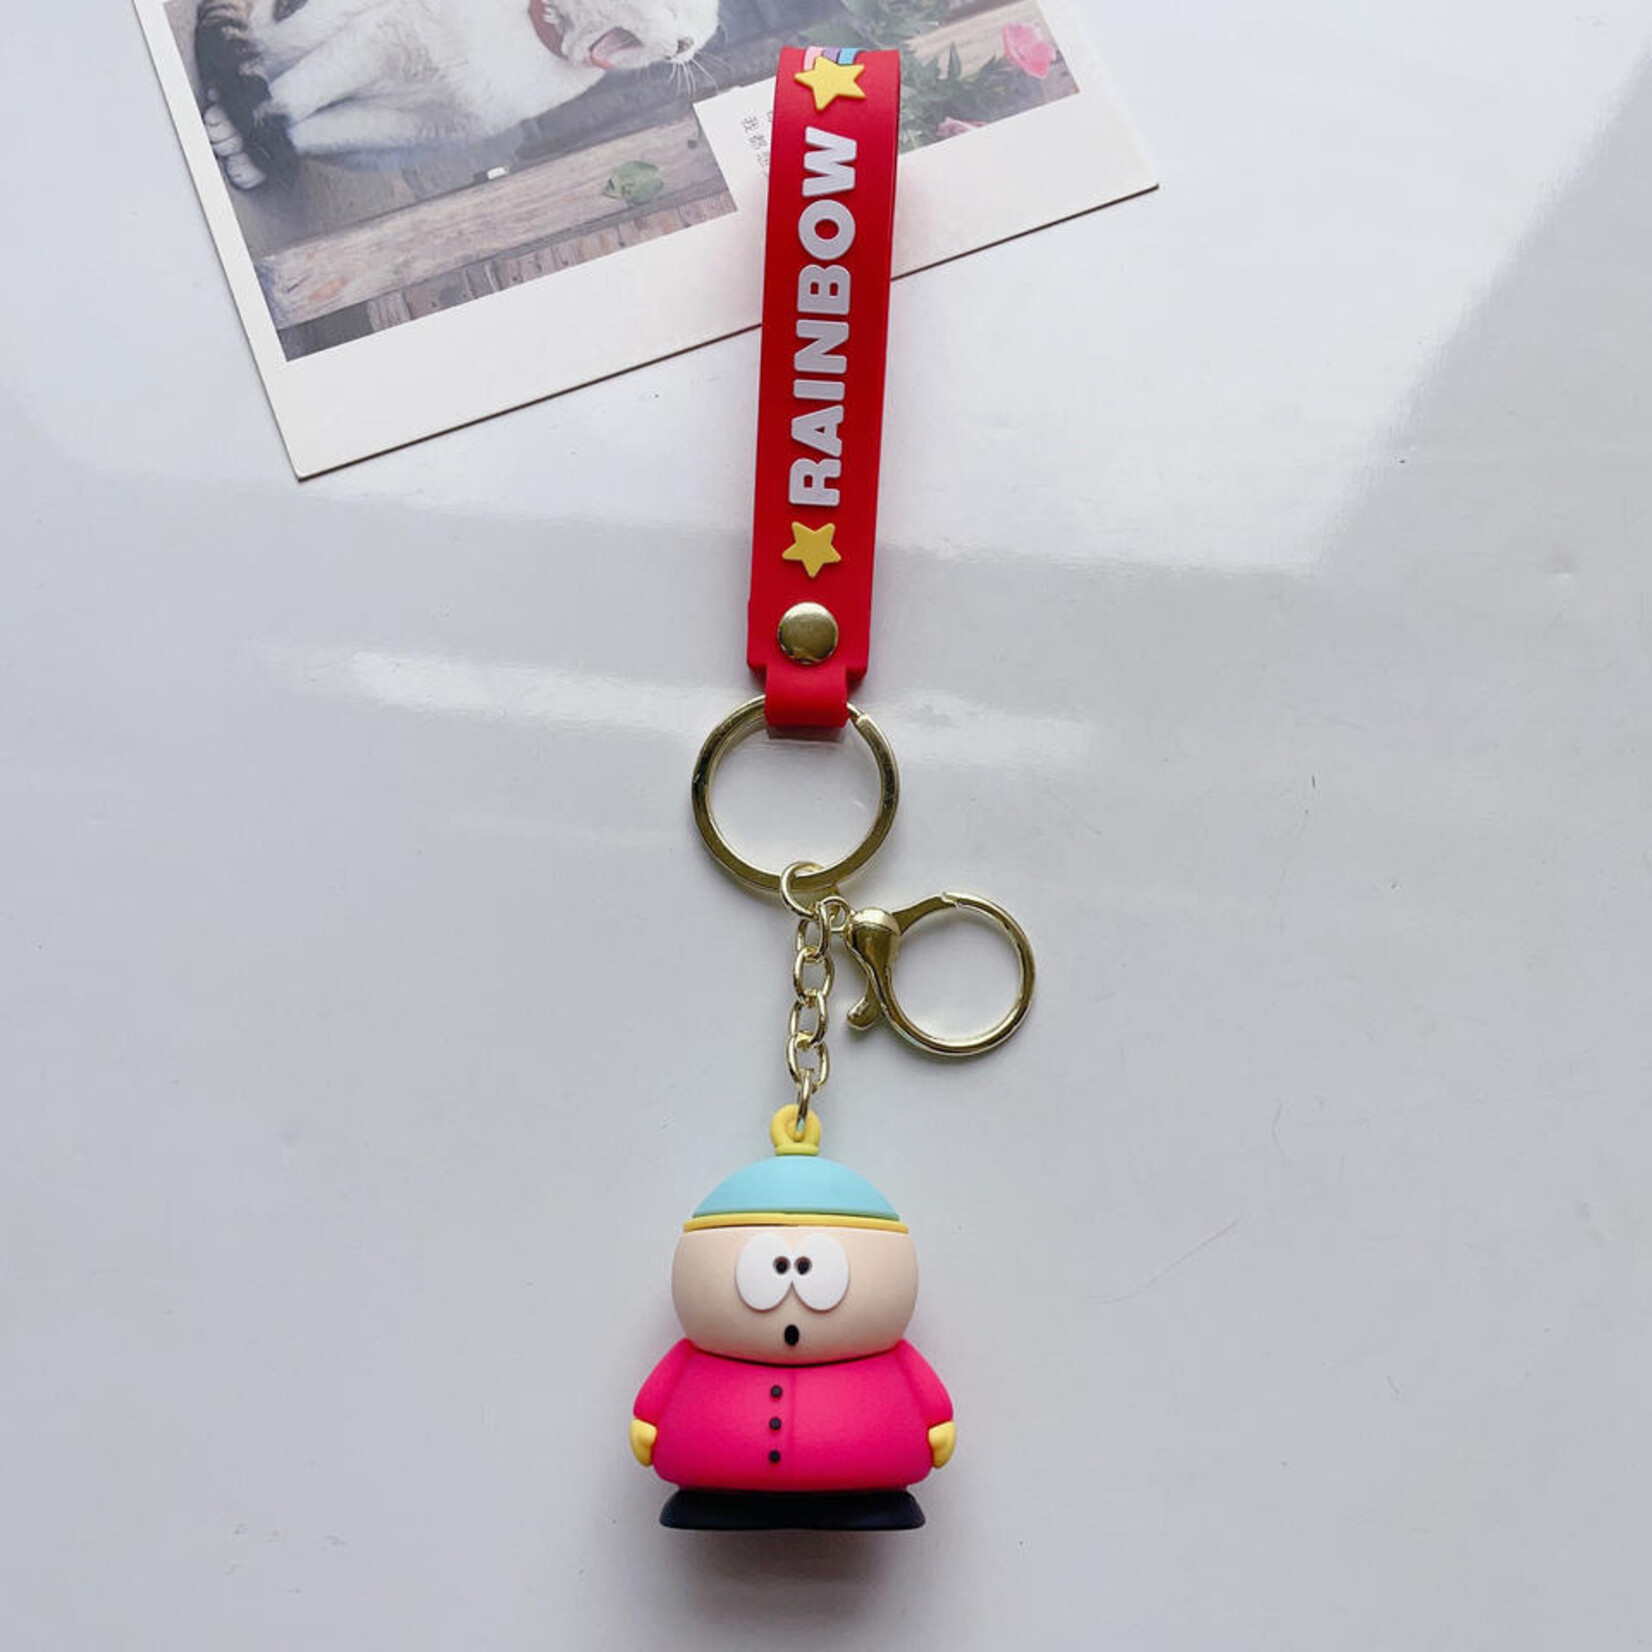 Generic South Park Keychains